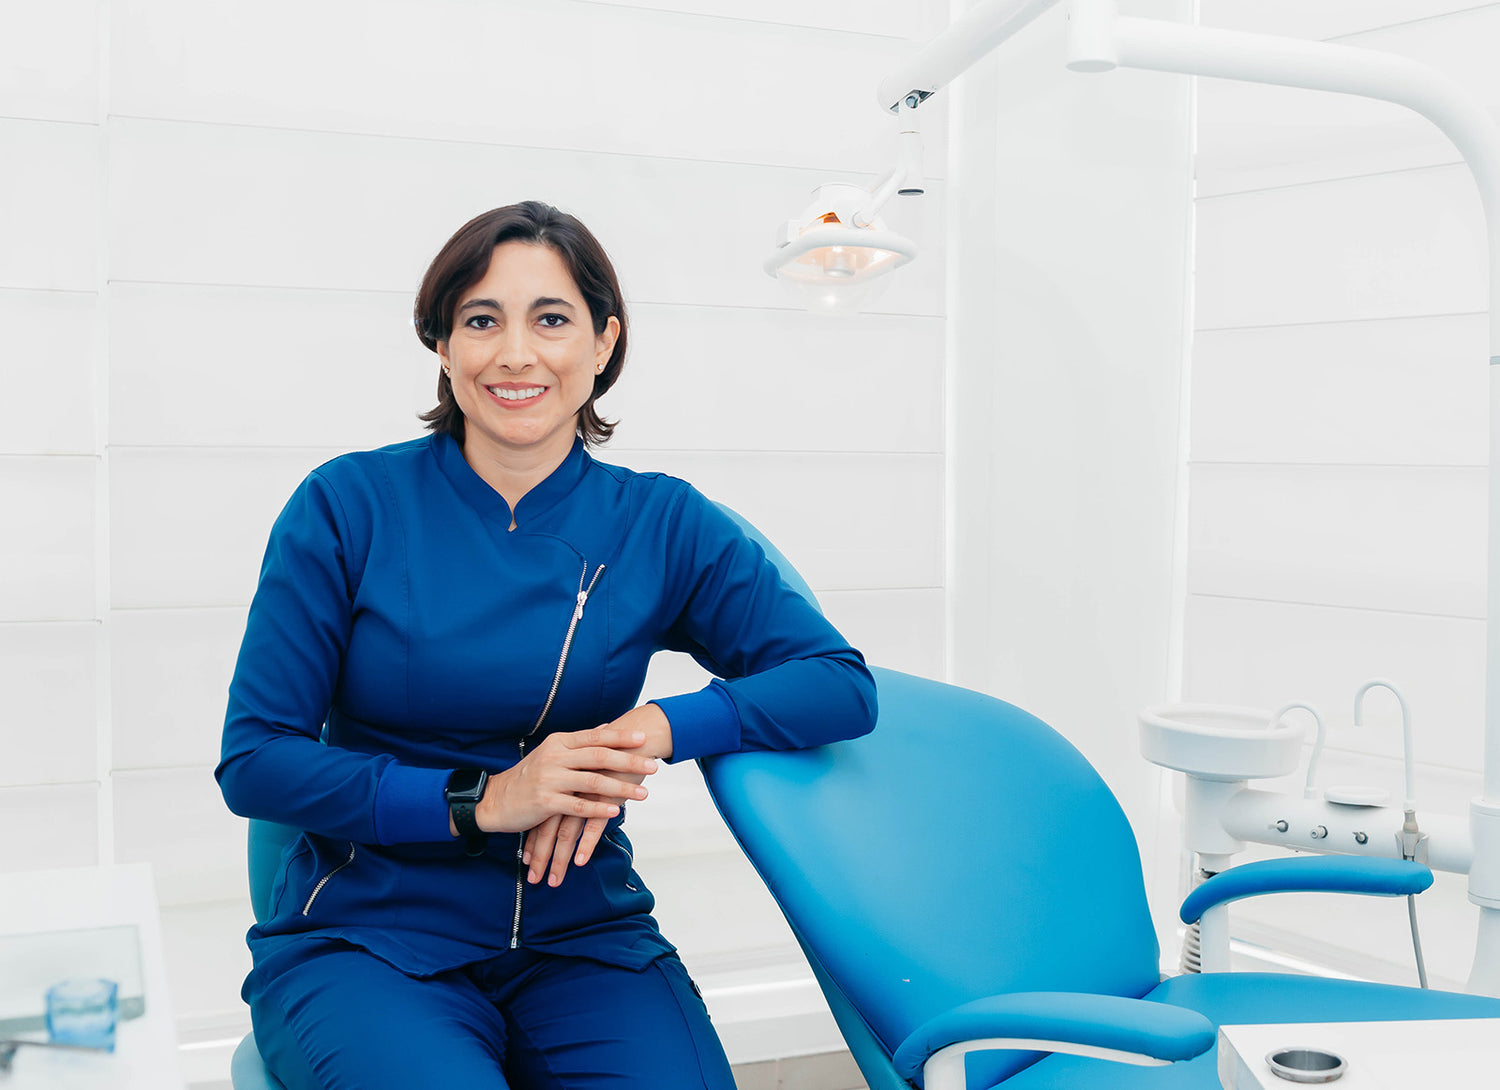 Smiling orthodontist in office